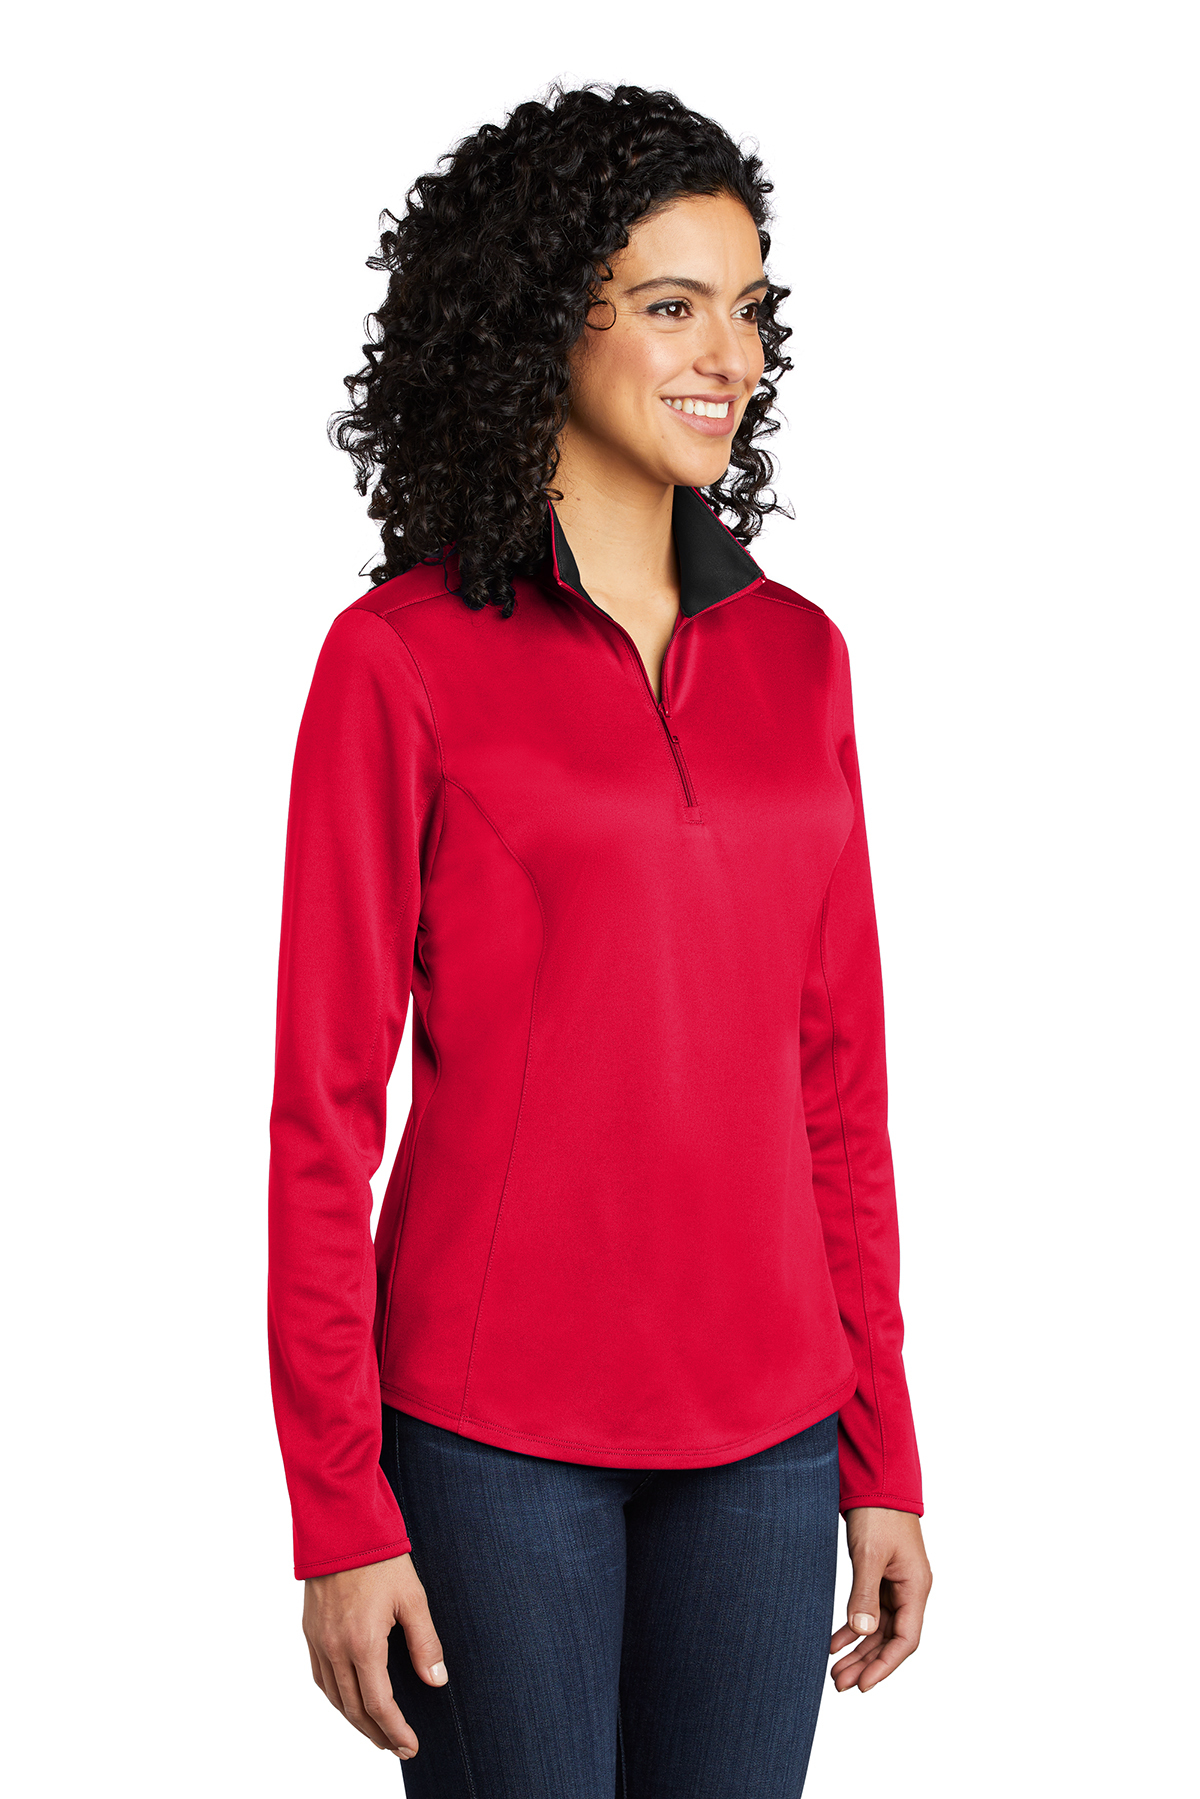 Port Authority Ladies Silk Touch Performance 1/4-Zip | Product | Port ...